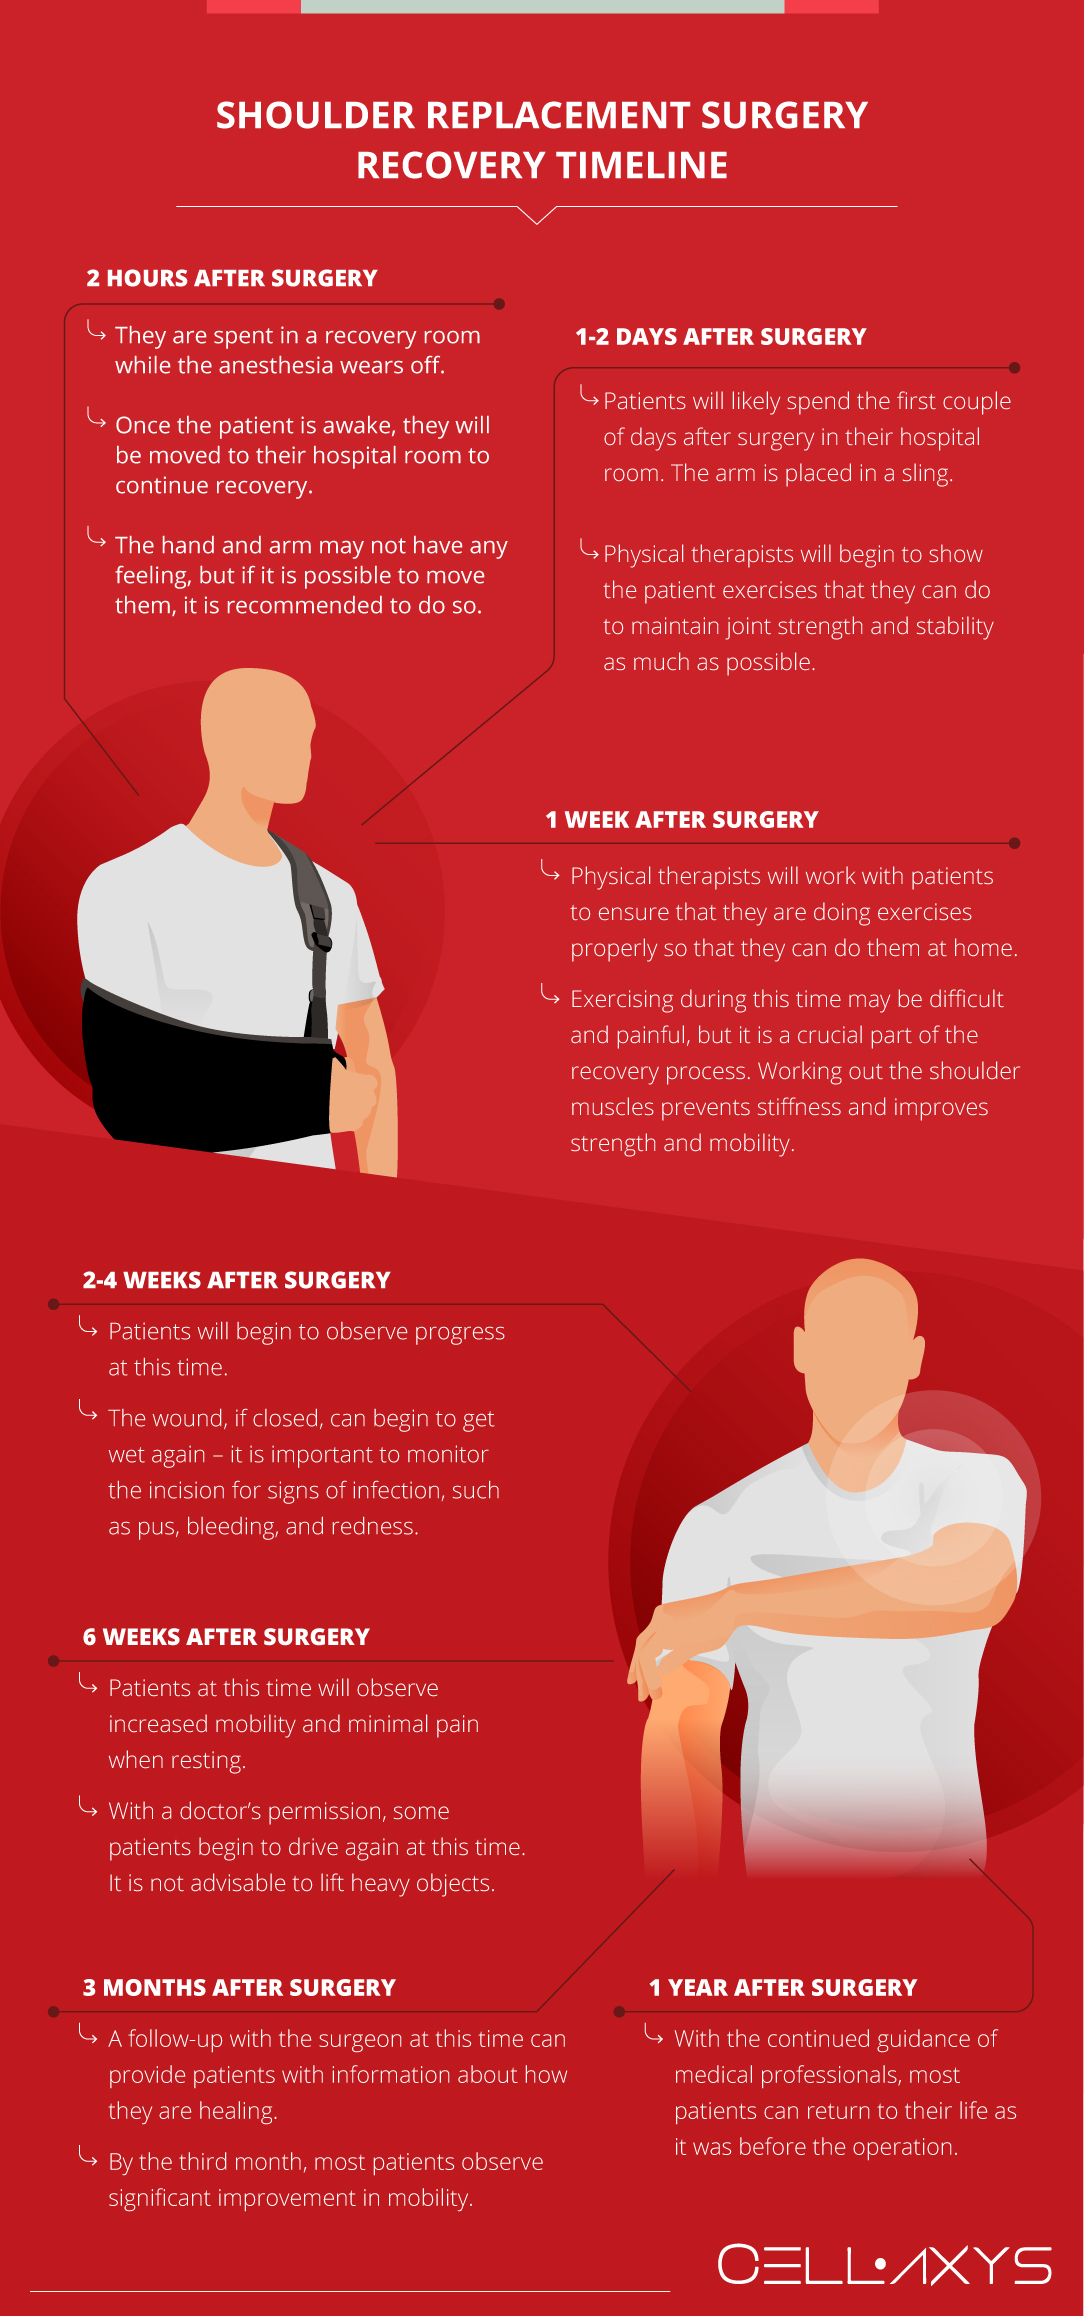 Shoulder Replacement Surgery Recovery Timeline